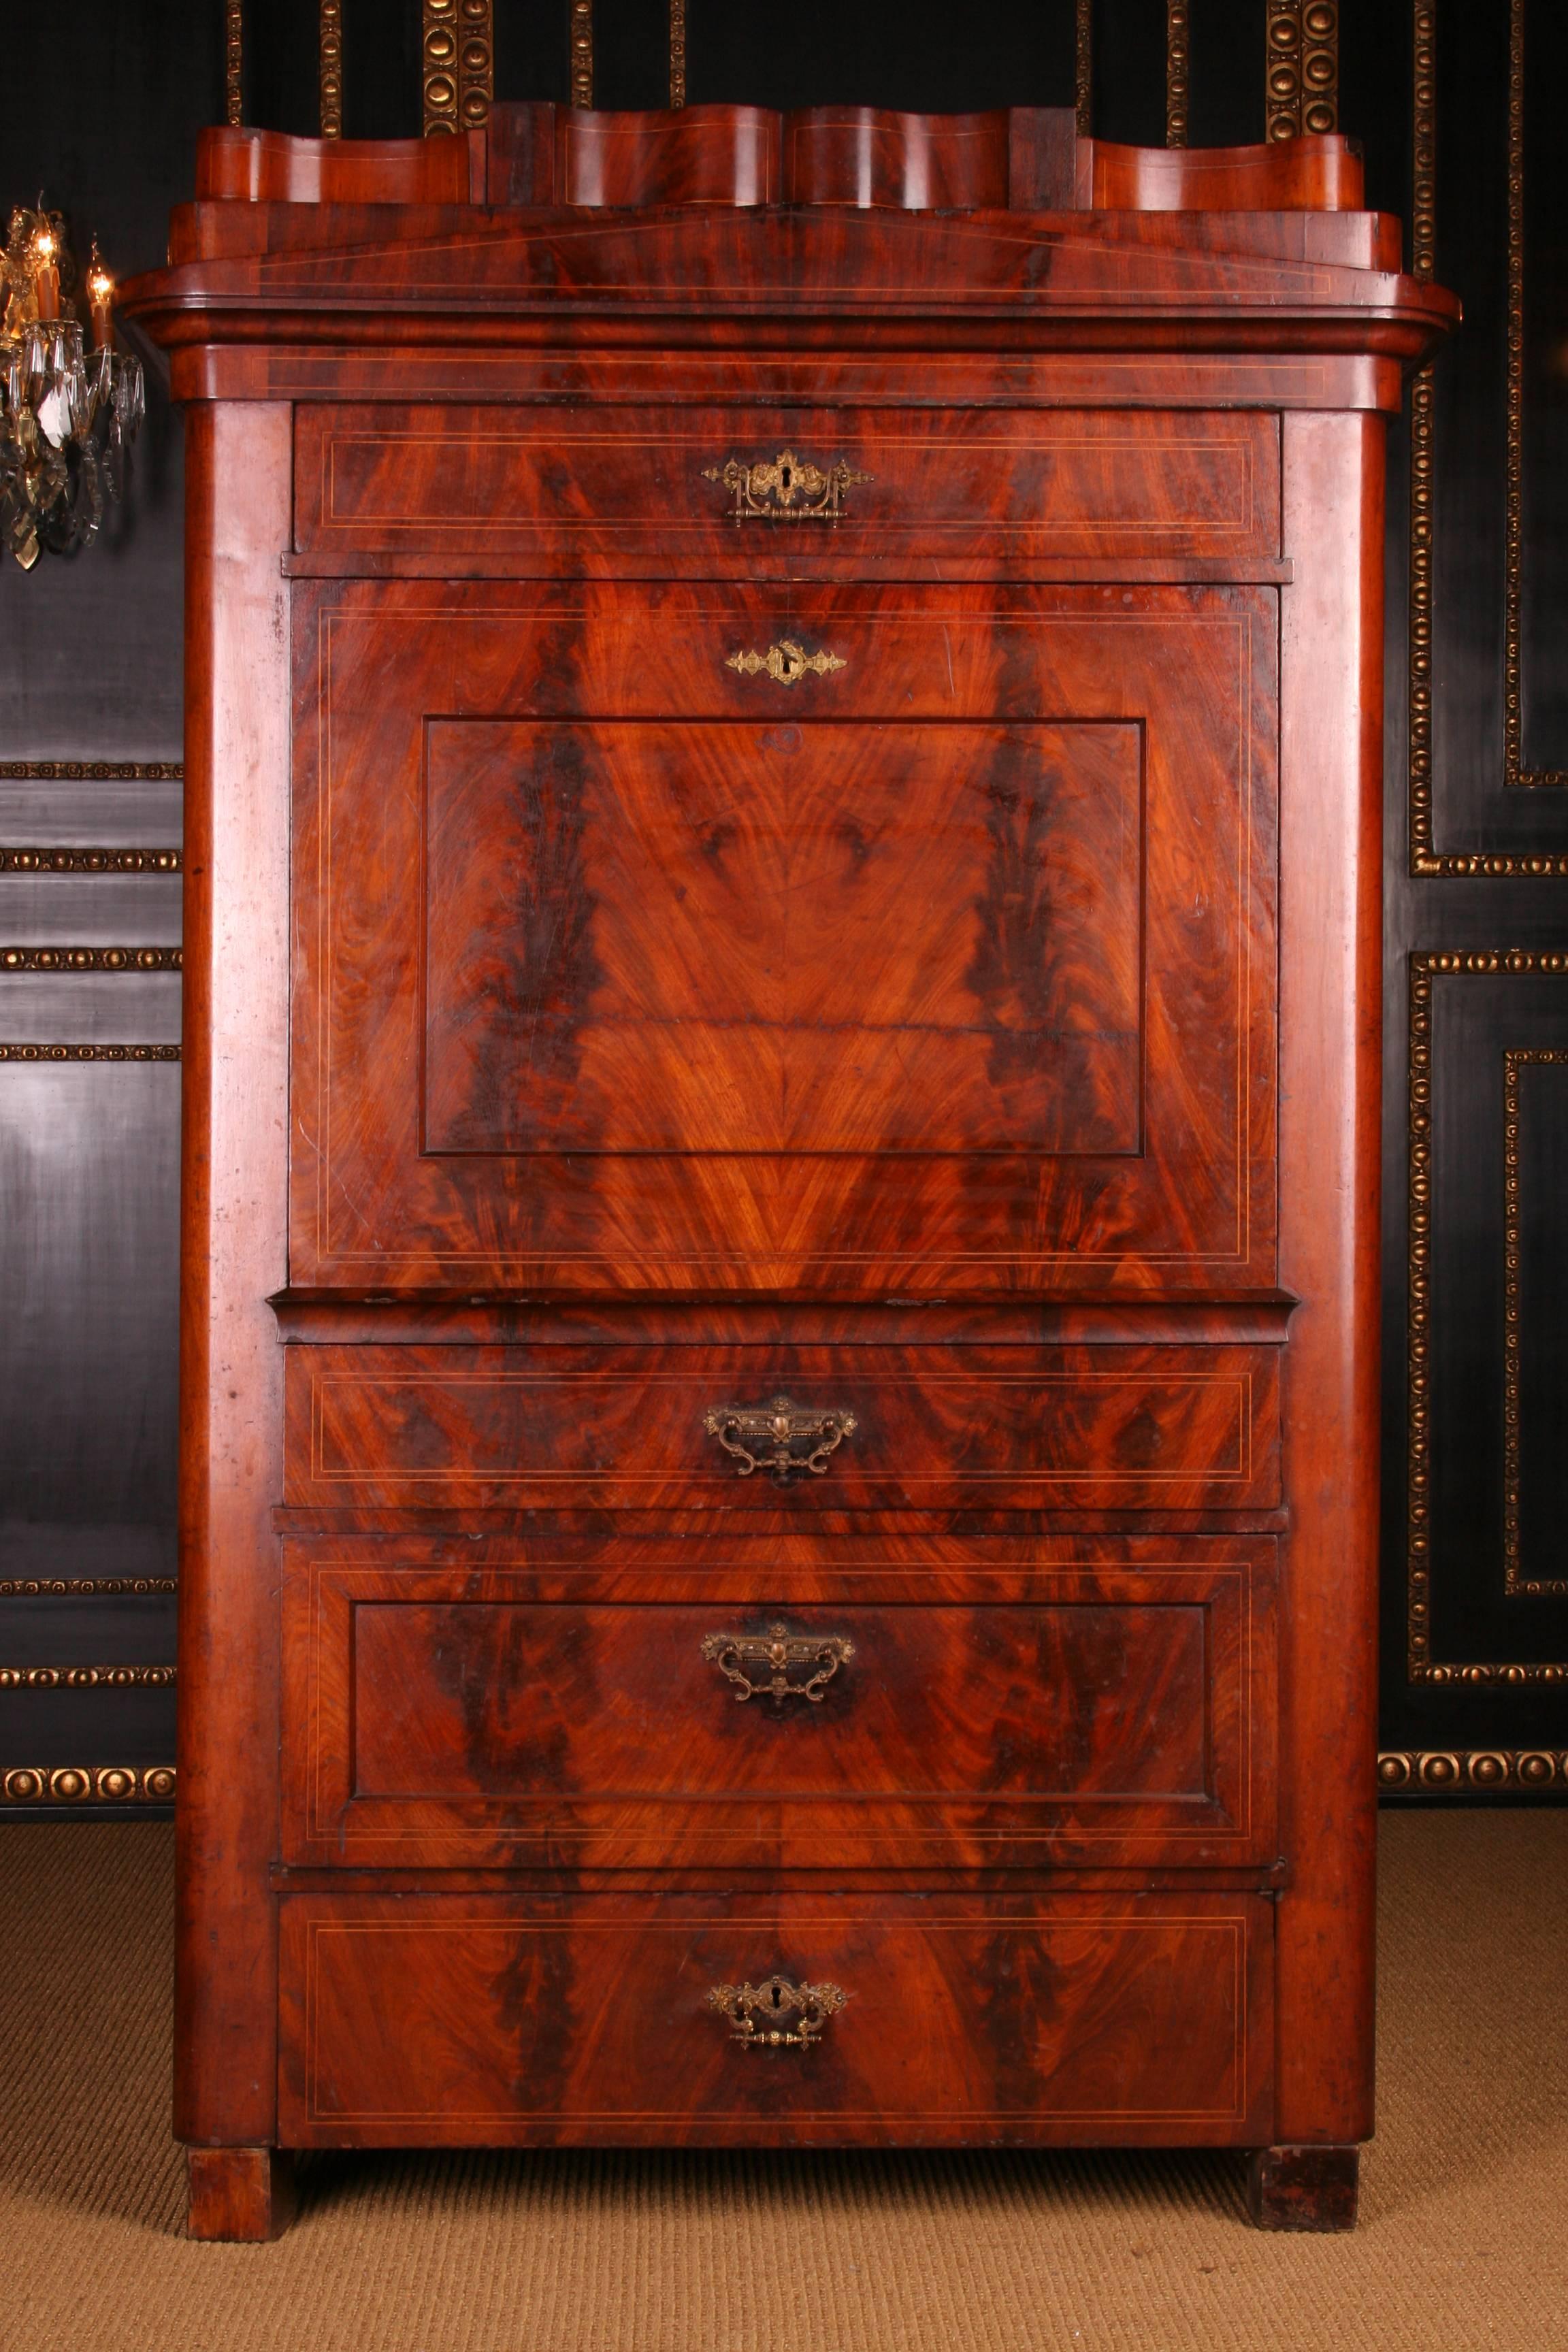 Cuba mahogany on solid conifer, high-rectangular body on log feet. In the articulated front four drawers of different sizes with partial recessed fillings. Cramped cornice, with final chink roof and stepped pedestal with hidden drawer. 

Excellent